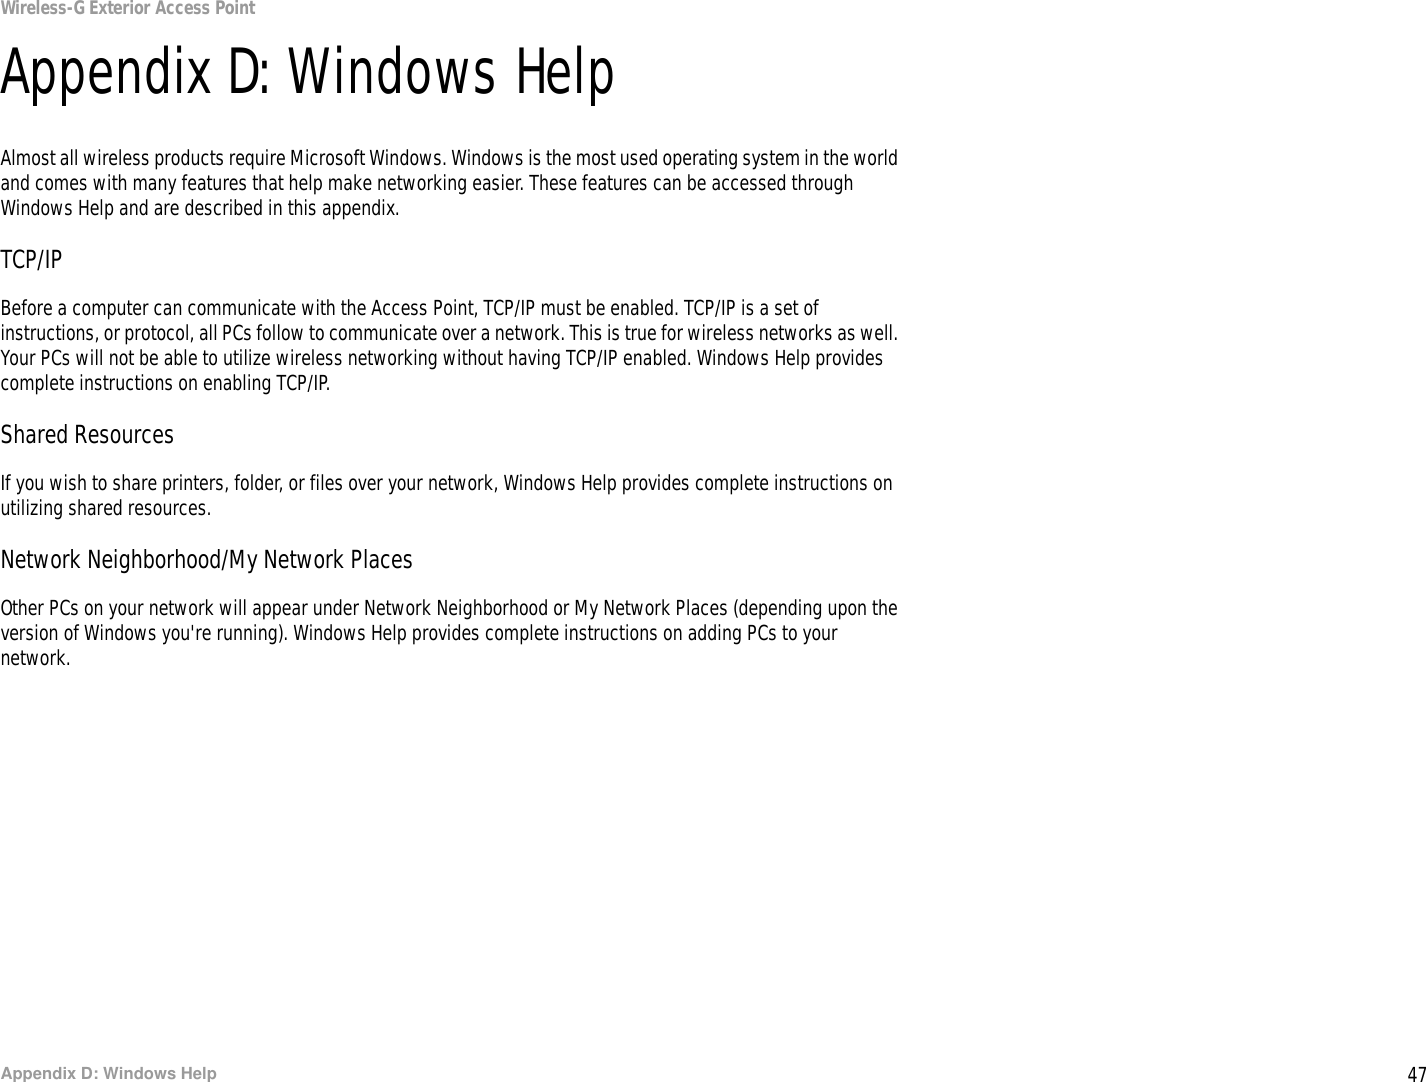 47Appendix D: Windows HelpWireless-G Exterior Access PointAppendix D: Windows HelpAlmost all wireless products require Microsoft Windows. Windows is the most used operating system in the world and comes with many features that help make networking easier. These features can be accessed through Windows Help and are described in this appendix.TCP/IPBefore a computer can communicate with the Access Point, TCP/IP must be enabled. TCP/IP is a set of instructions, or protocol, all PCs follow to communicate over a network. This is true for wireless networks as well. Your PCs will not be able to utilize wireless networking without having TCP/IP enabled. Windows Help provides complete instructions on enabling TCP/IP.Shared ResourcesIf you wish to share printers, folder, or files over your network, Windows Help provides complete instructions on utilizing shared resources.Network Neighborhood/My Network PlacesOther PCs on your network will appear under Network Neighborhood or My Network Places (depending upon the version of Windows you&apos;re running). Windows Help provides complete instructions on adding PCs to your network.